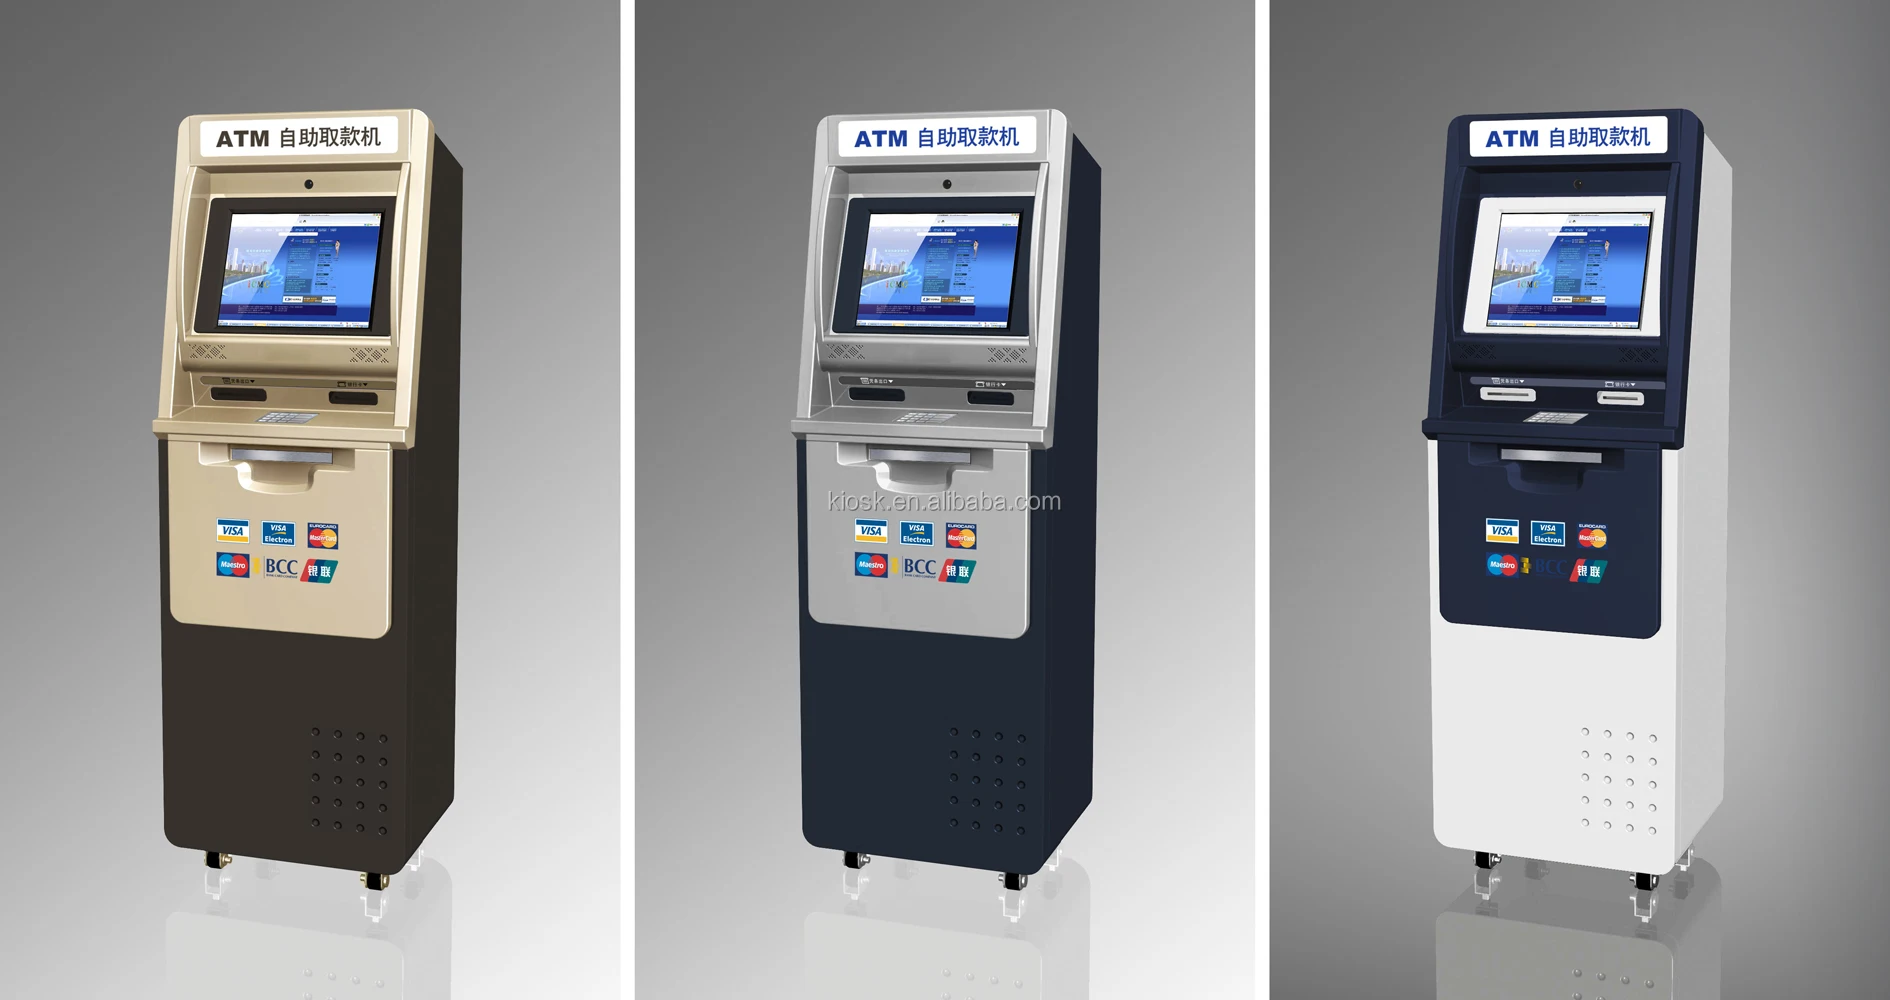 Customize Crypto Currency Bitcoin Atm Machine Touch Screen Payment Kiosk - Buy Payment Kiosk ...